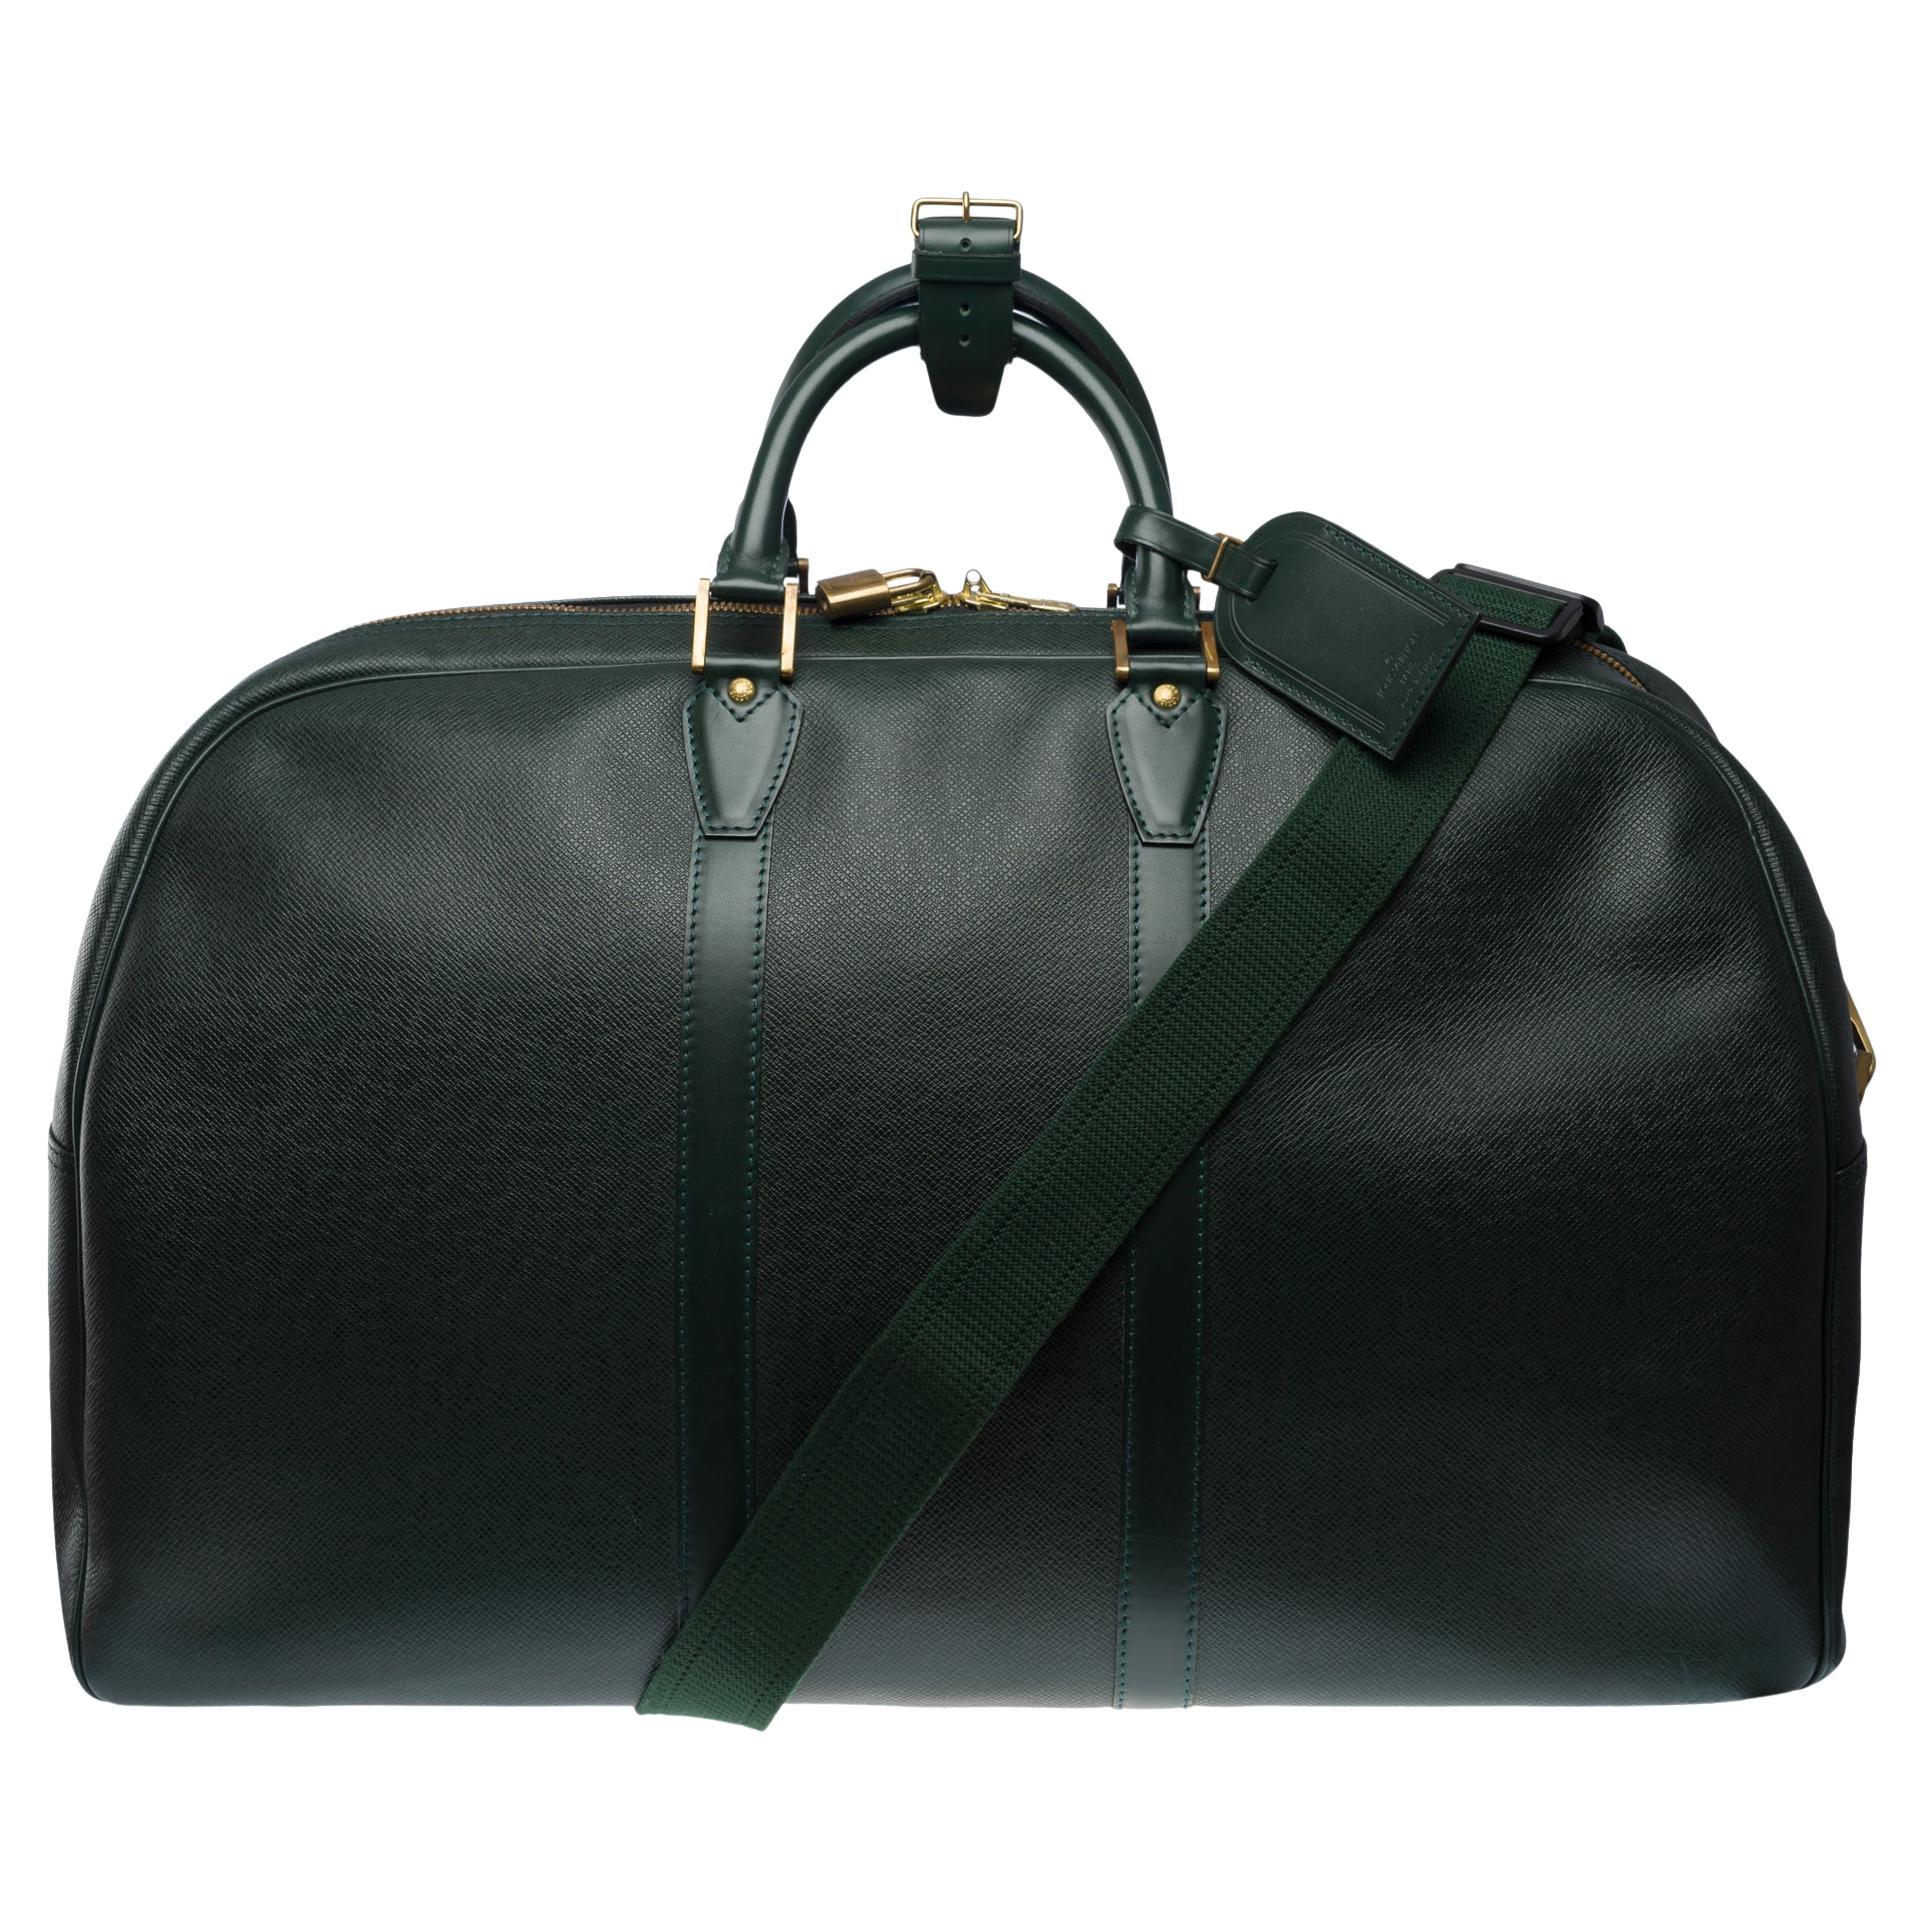 Louis Vuitton Kendall large model travel bag in green taiga leather